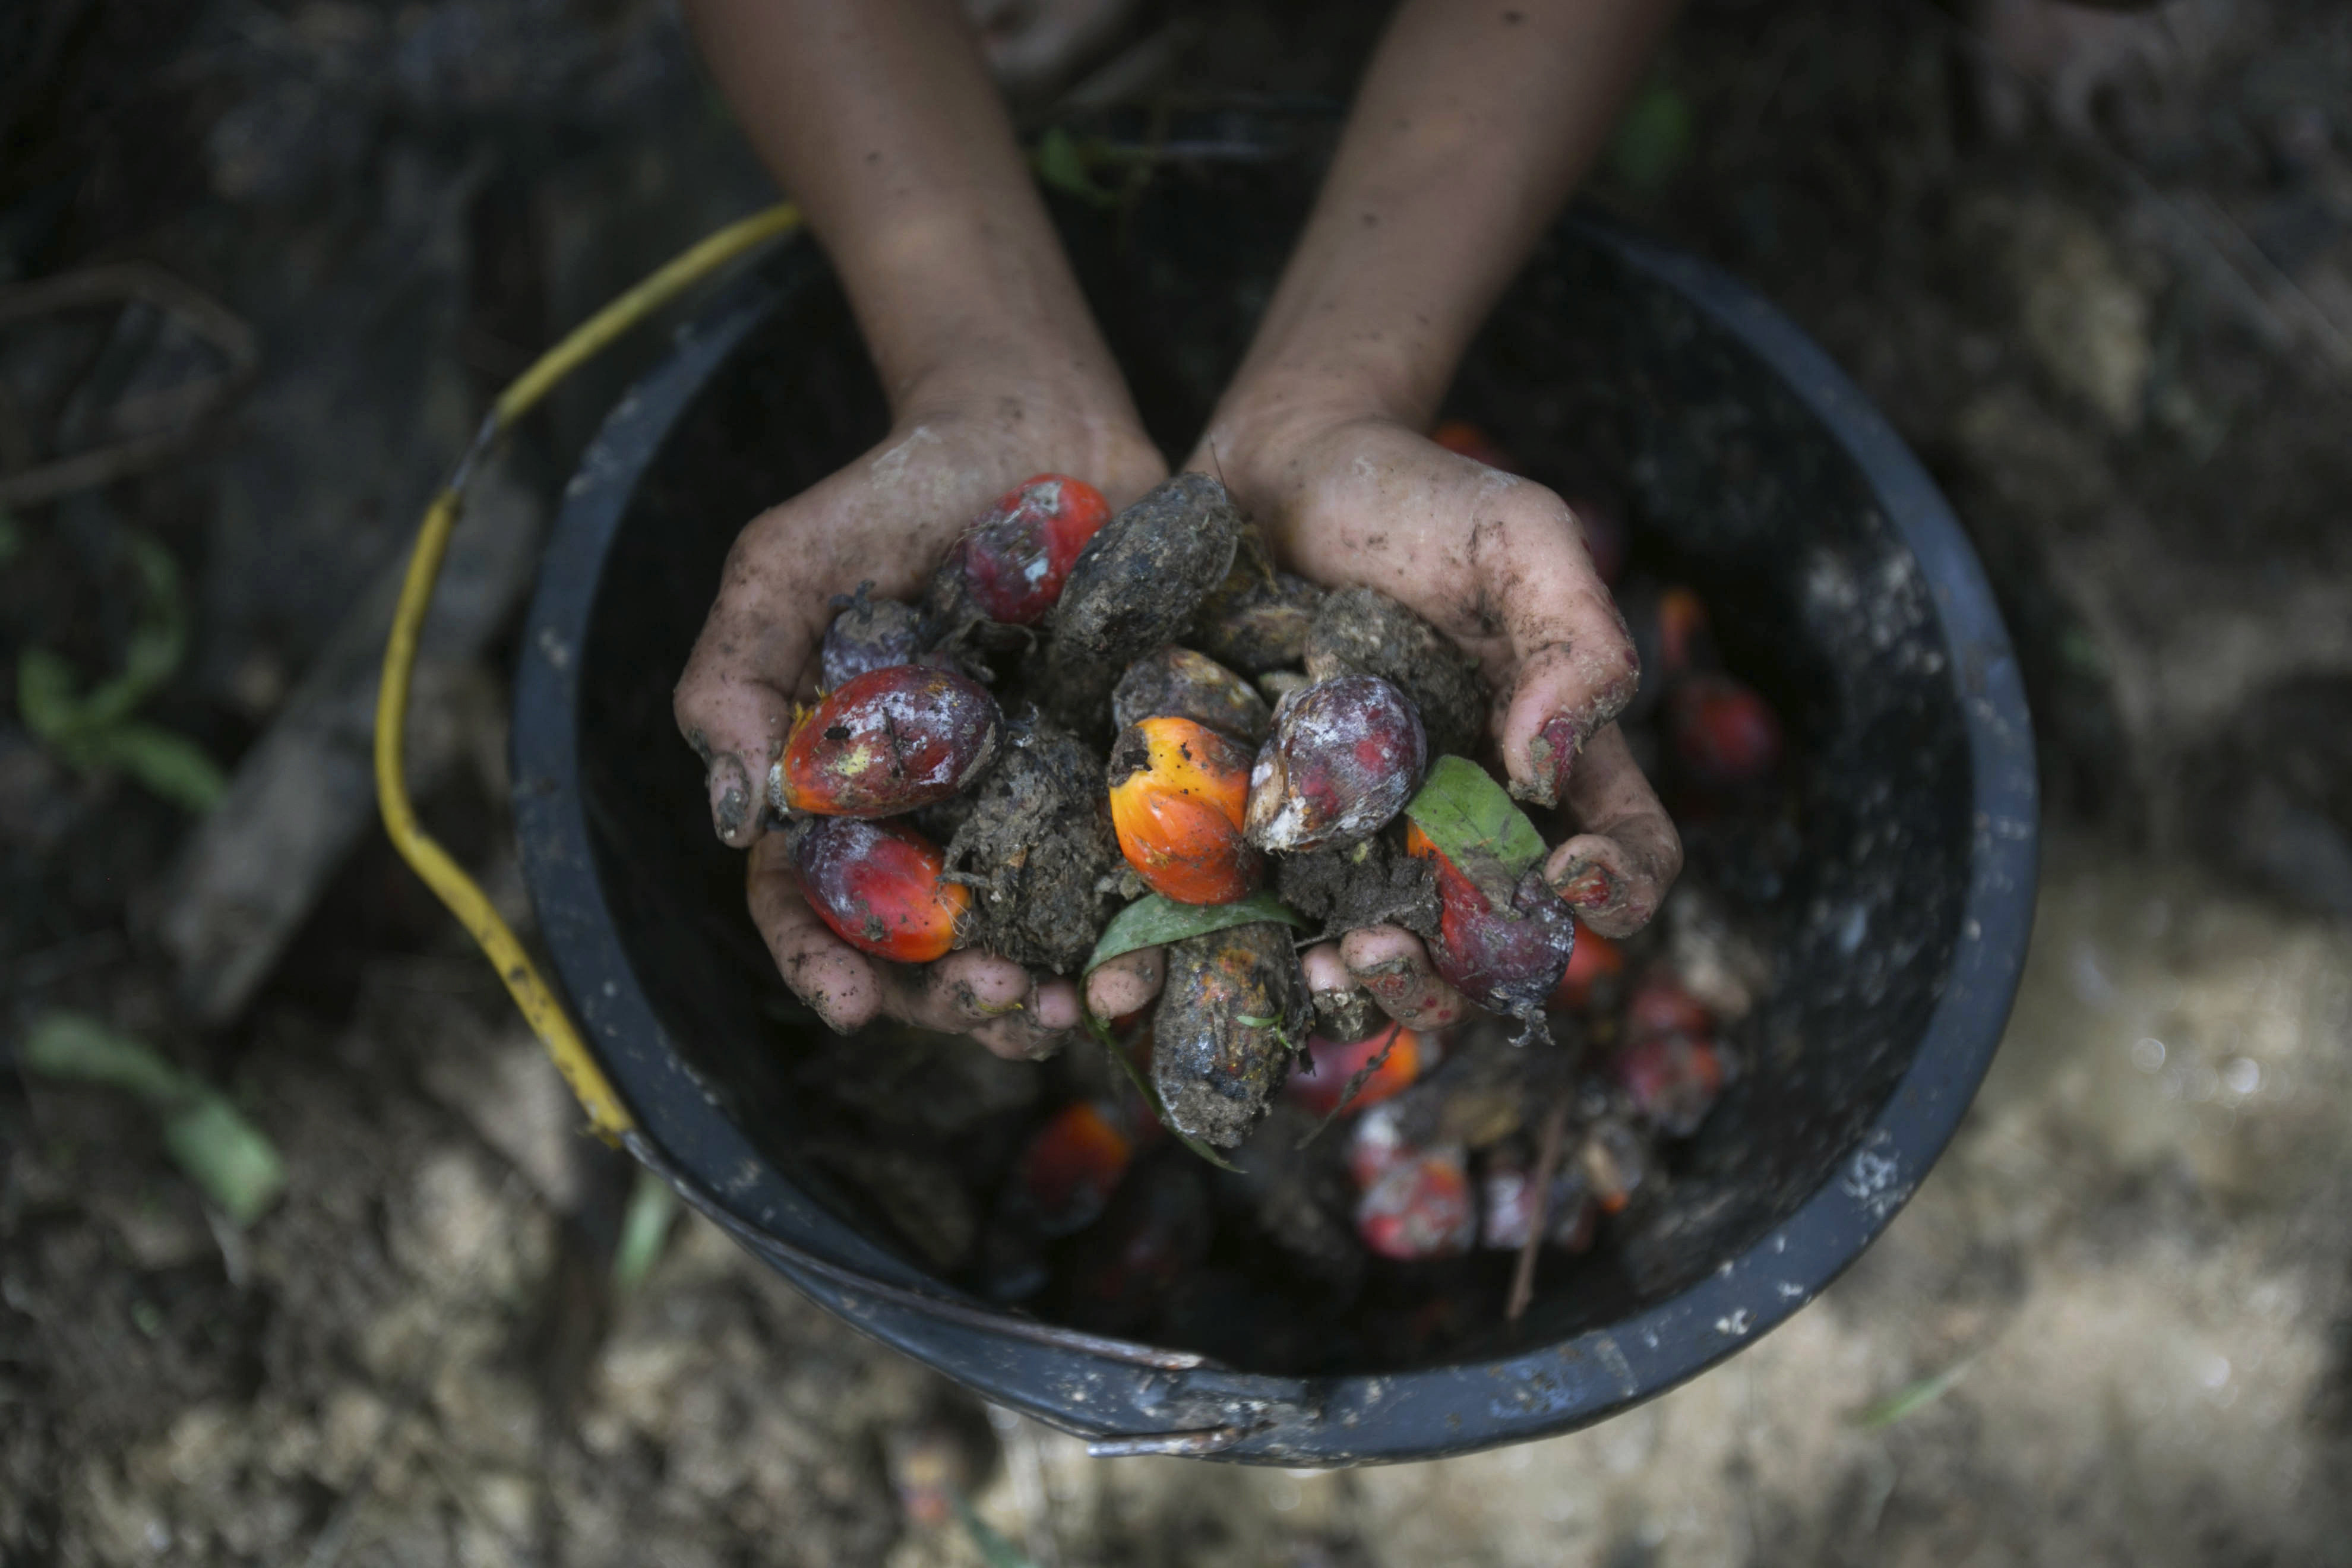 A little girl holds palm oil fruit collected from a plantation in Sumatra, Indonesia, on November 13, 2017. With the new rules, buyers in Europe will no longer find it economically viable to buy from sweatshops. Photo: AP